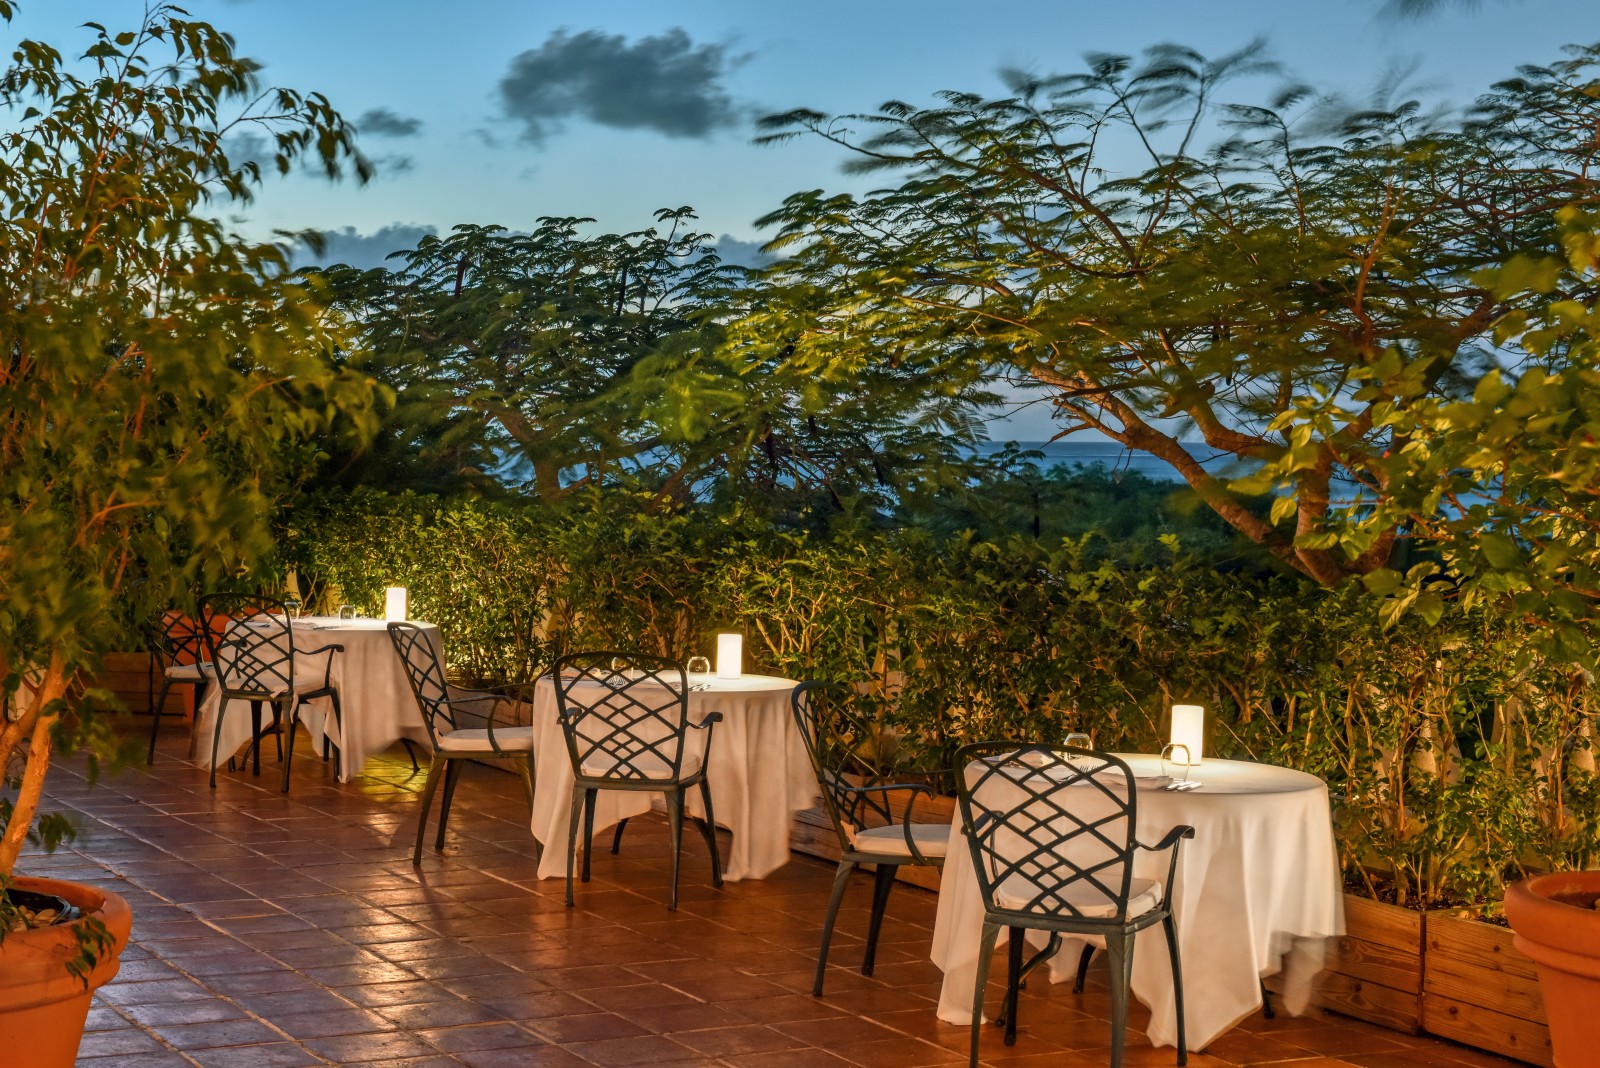 tables with white table cloths surrounded by trees during sunset